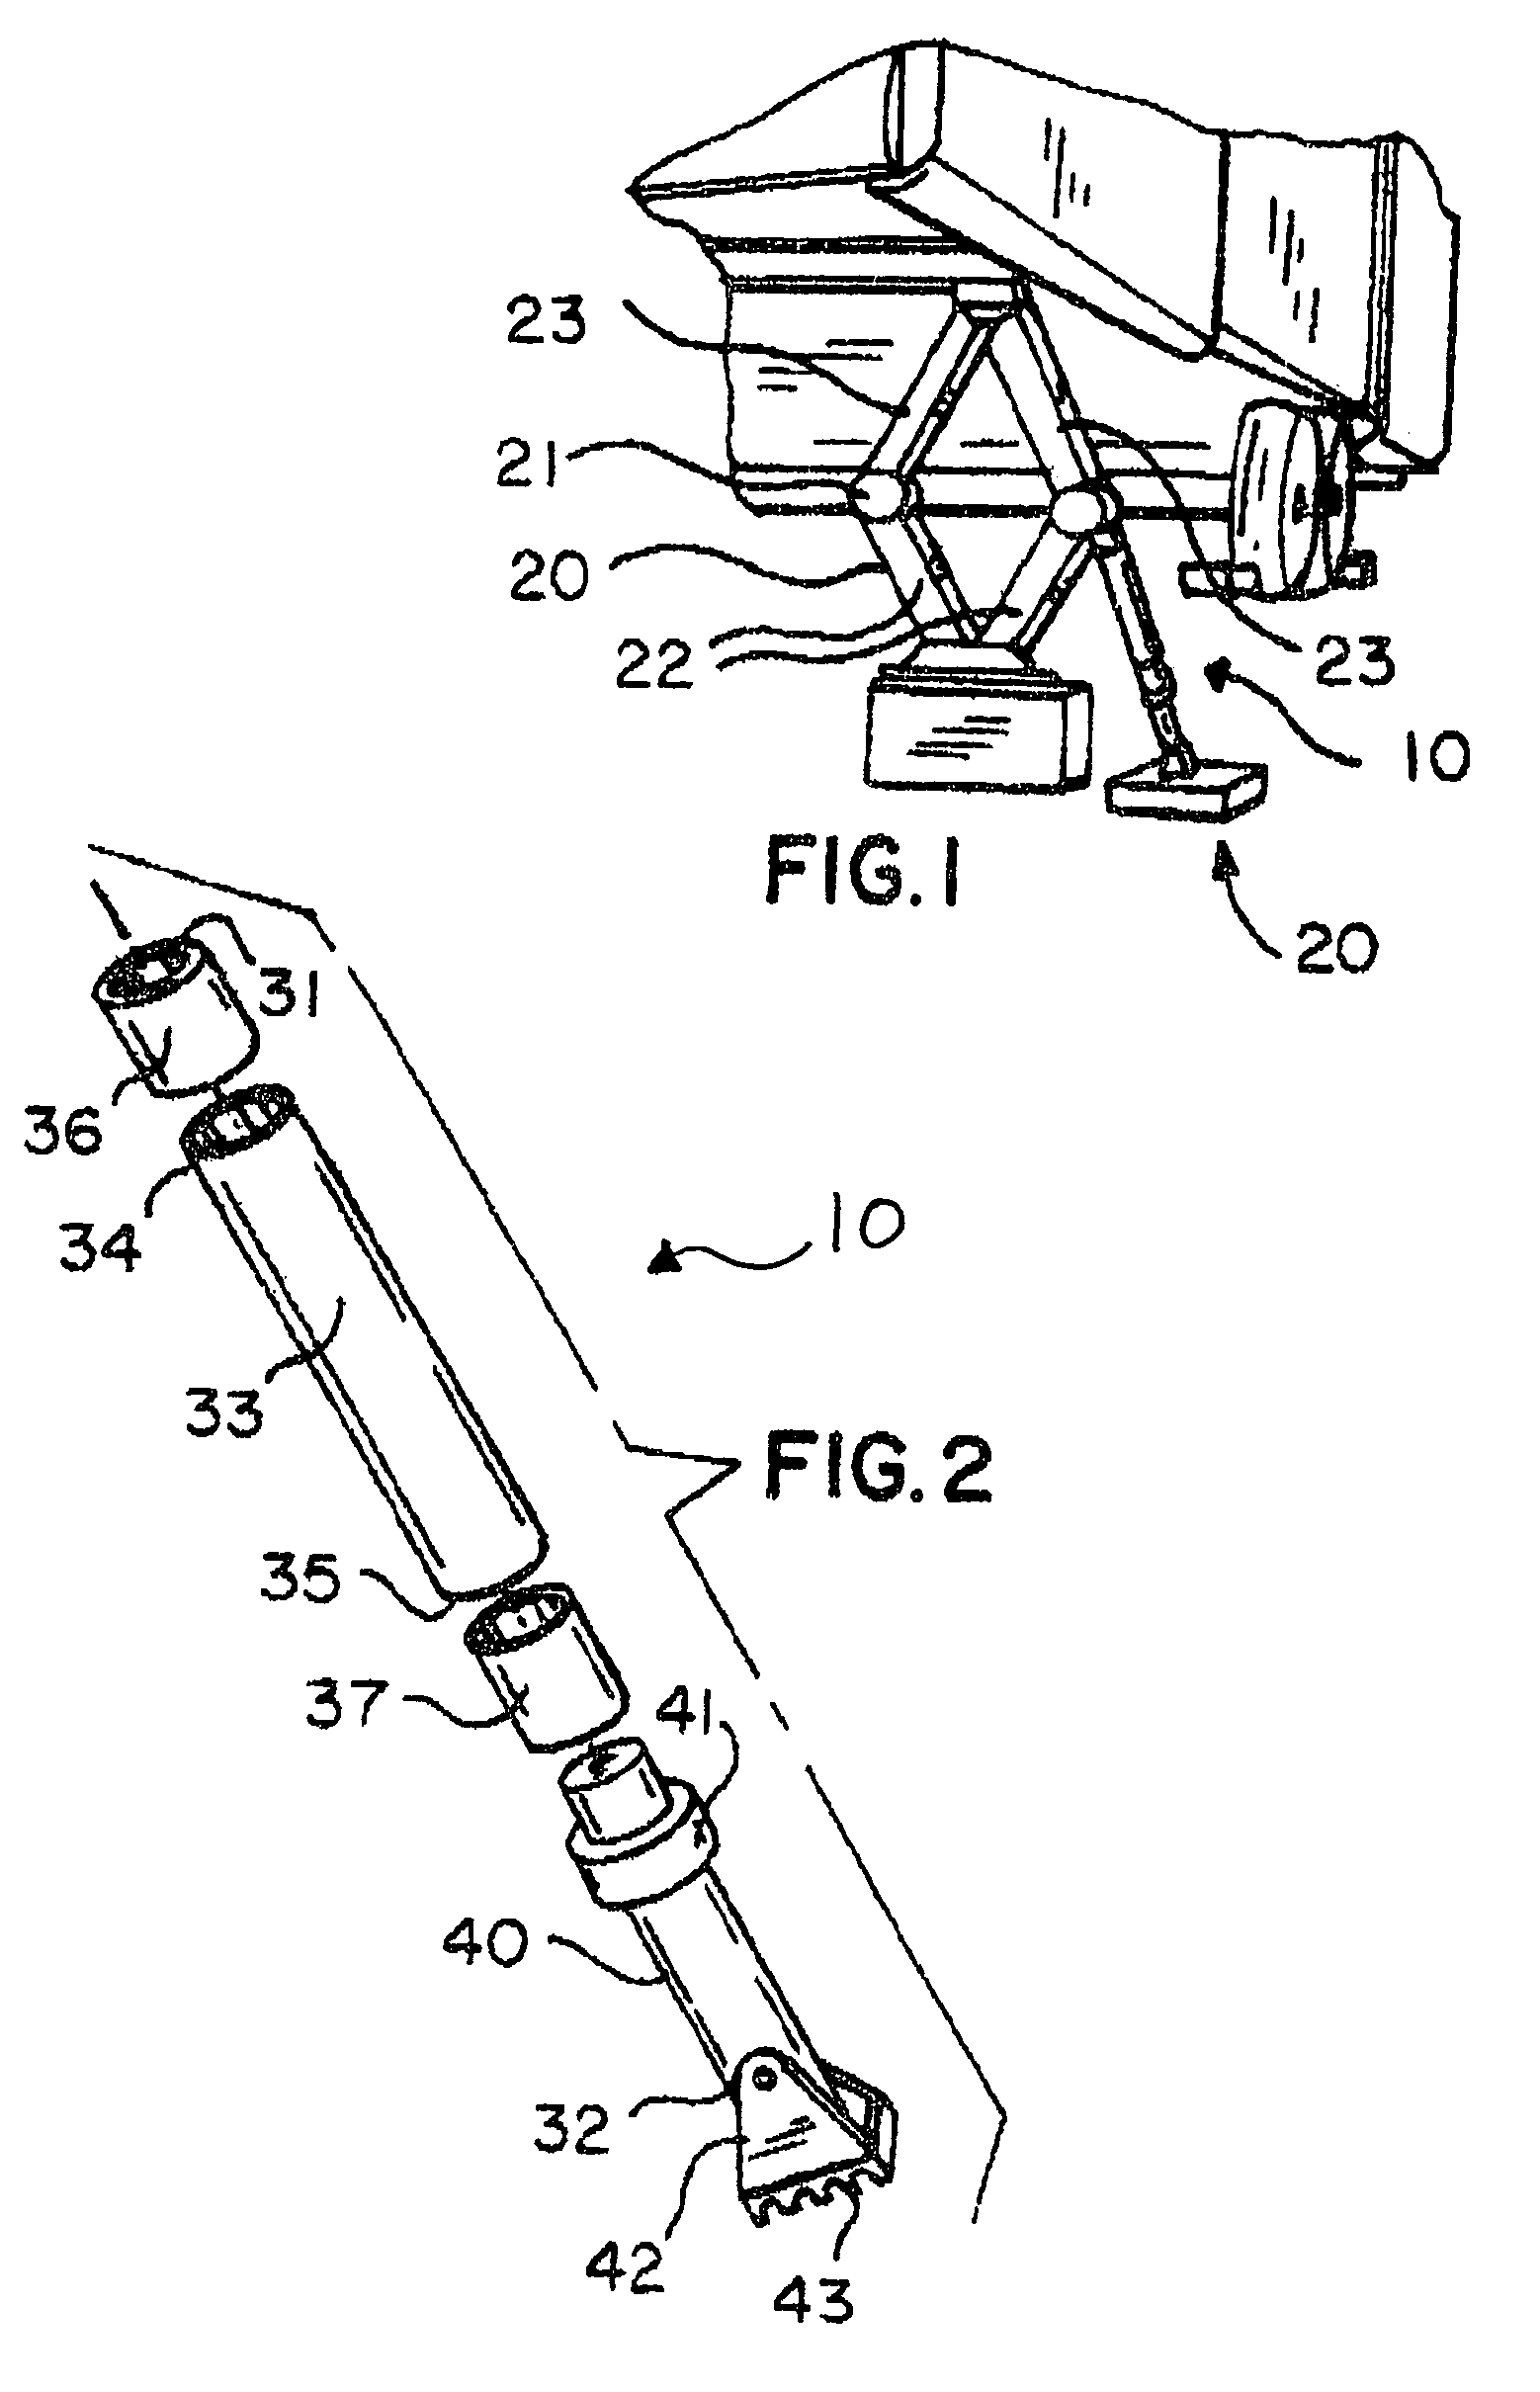 Support rod for stabilizing an existing scissor jack